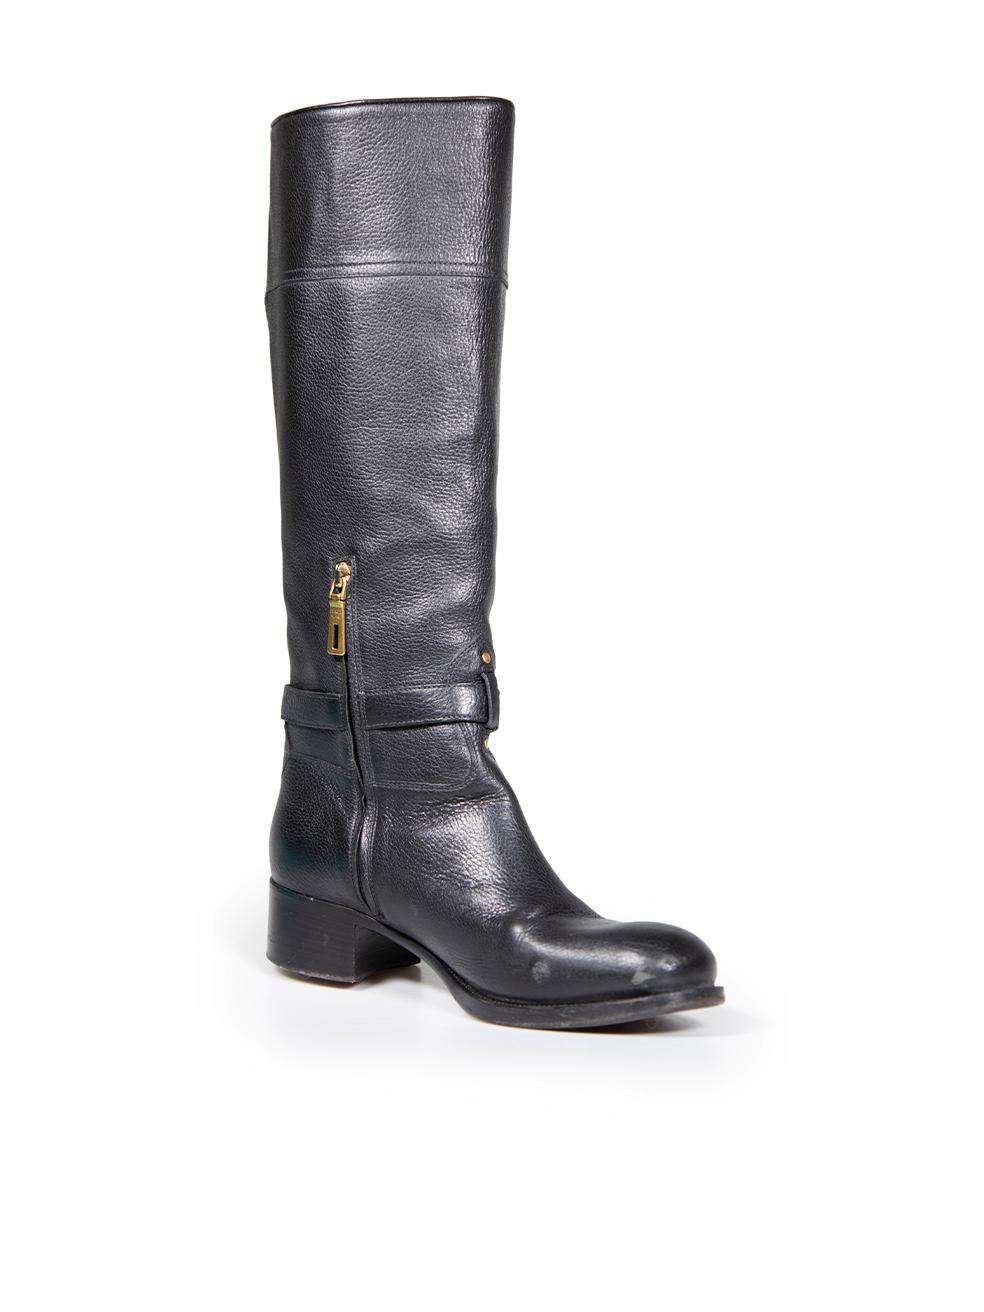 CONDITION is Good. Minor wear to boots is evident. Wear to soles with some light scratches and abrasions to the sides of the shoe on this used Prada designer resale item.
 
 Details
 Black
 Calfskin leather
 Knee high boots
 Round toe
 Low block